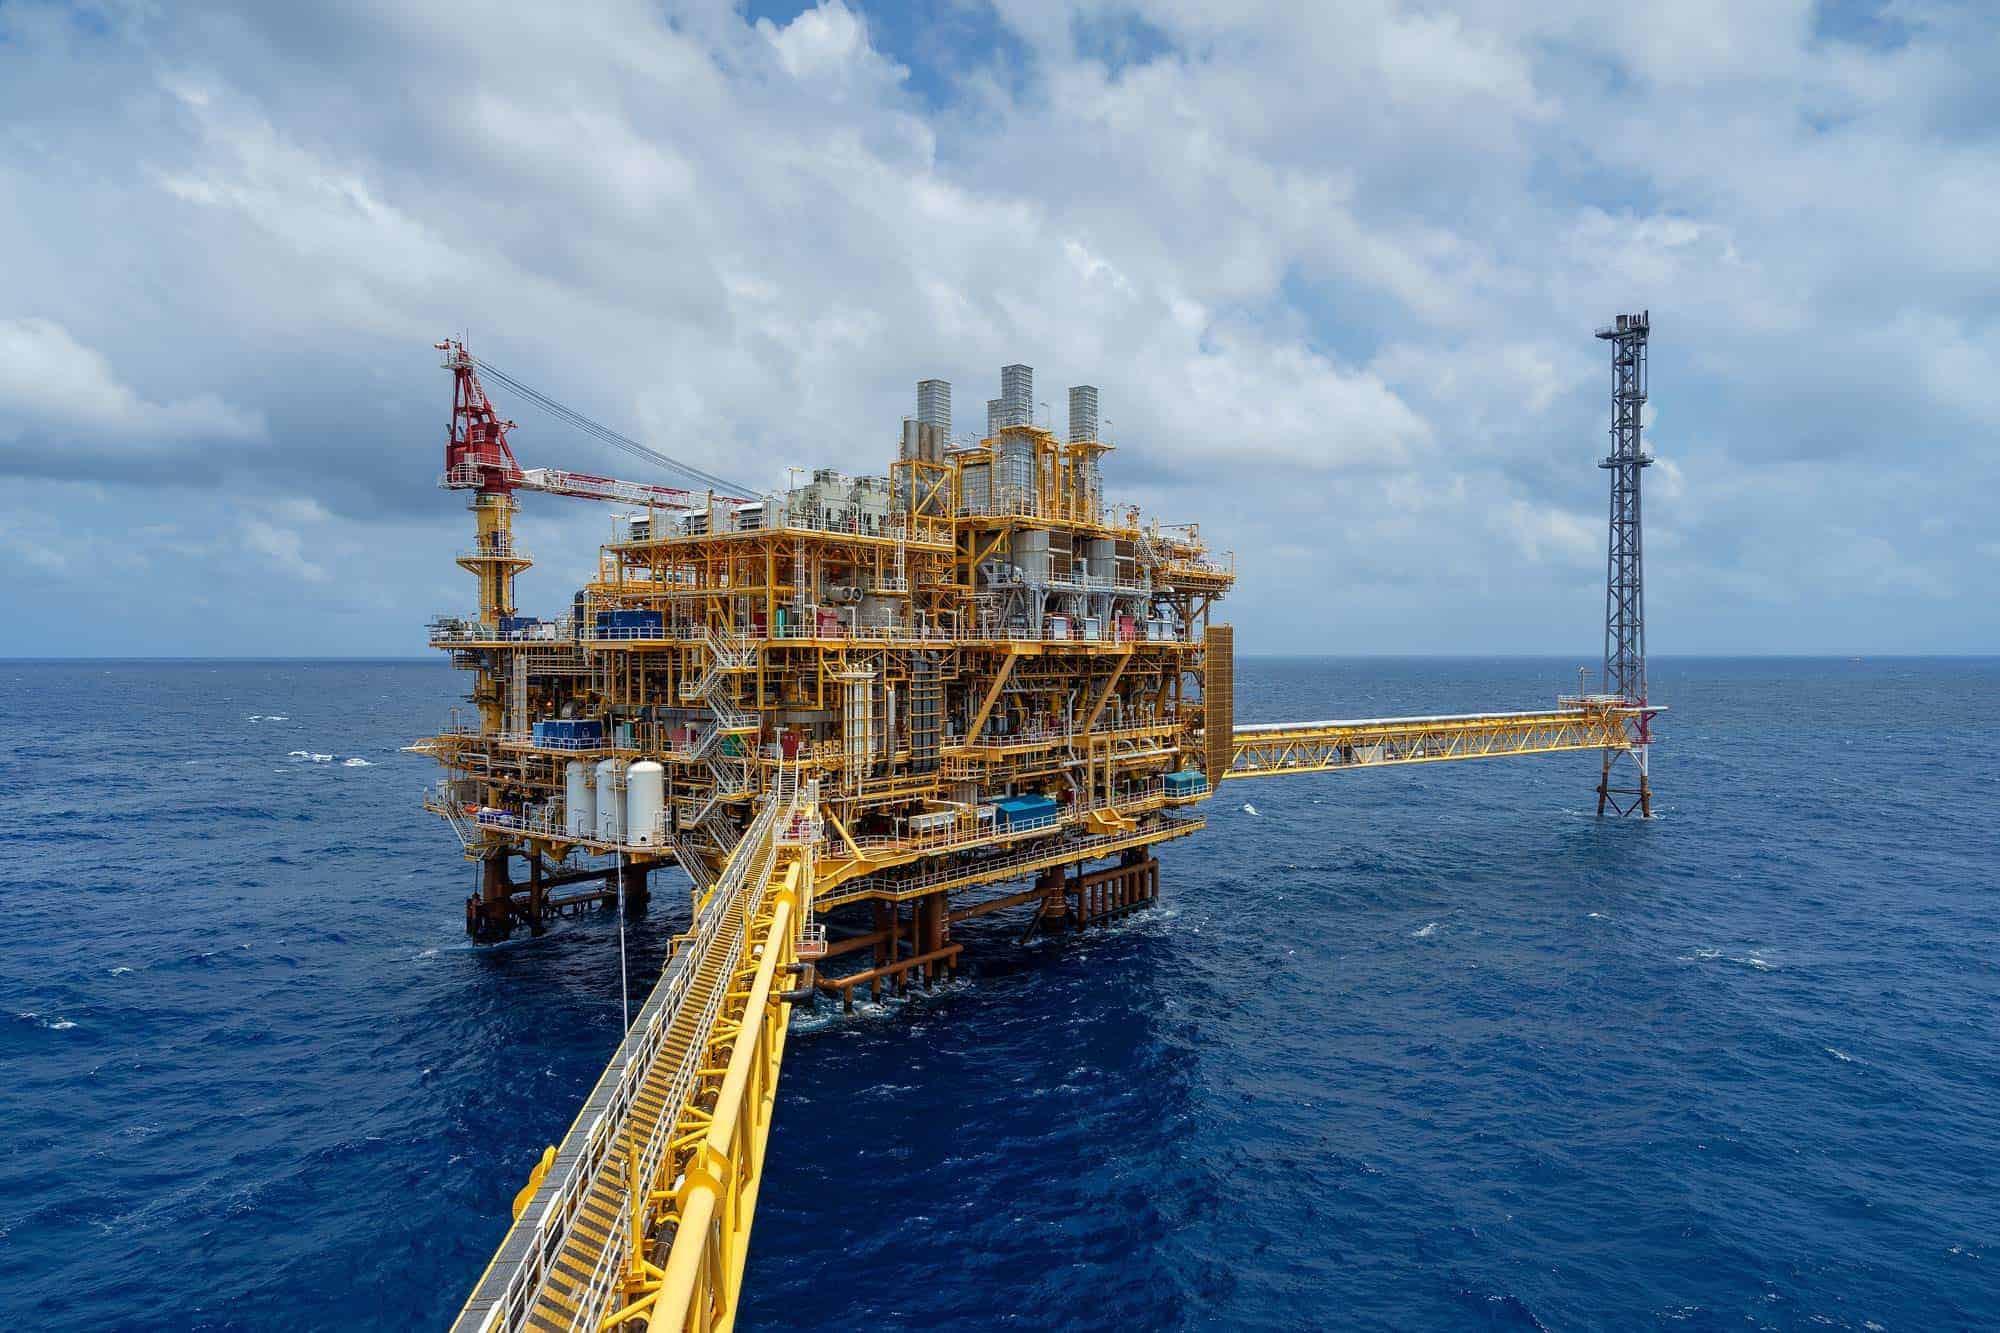 Offshore oil and gas platform in operation at sea.